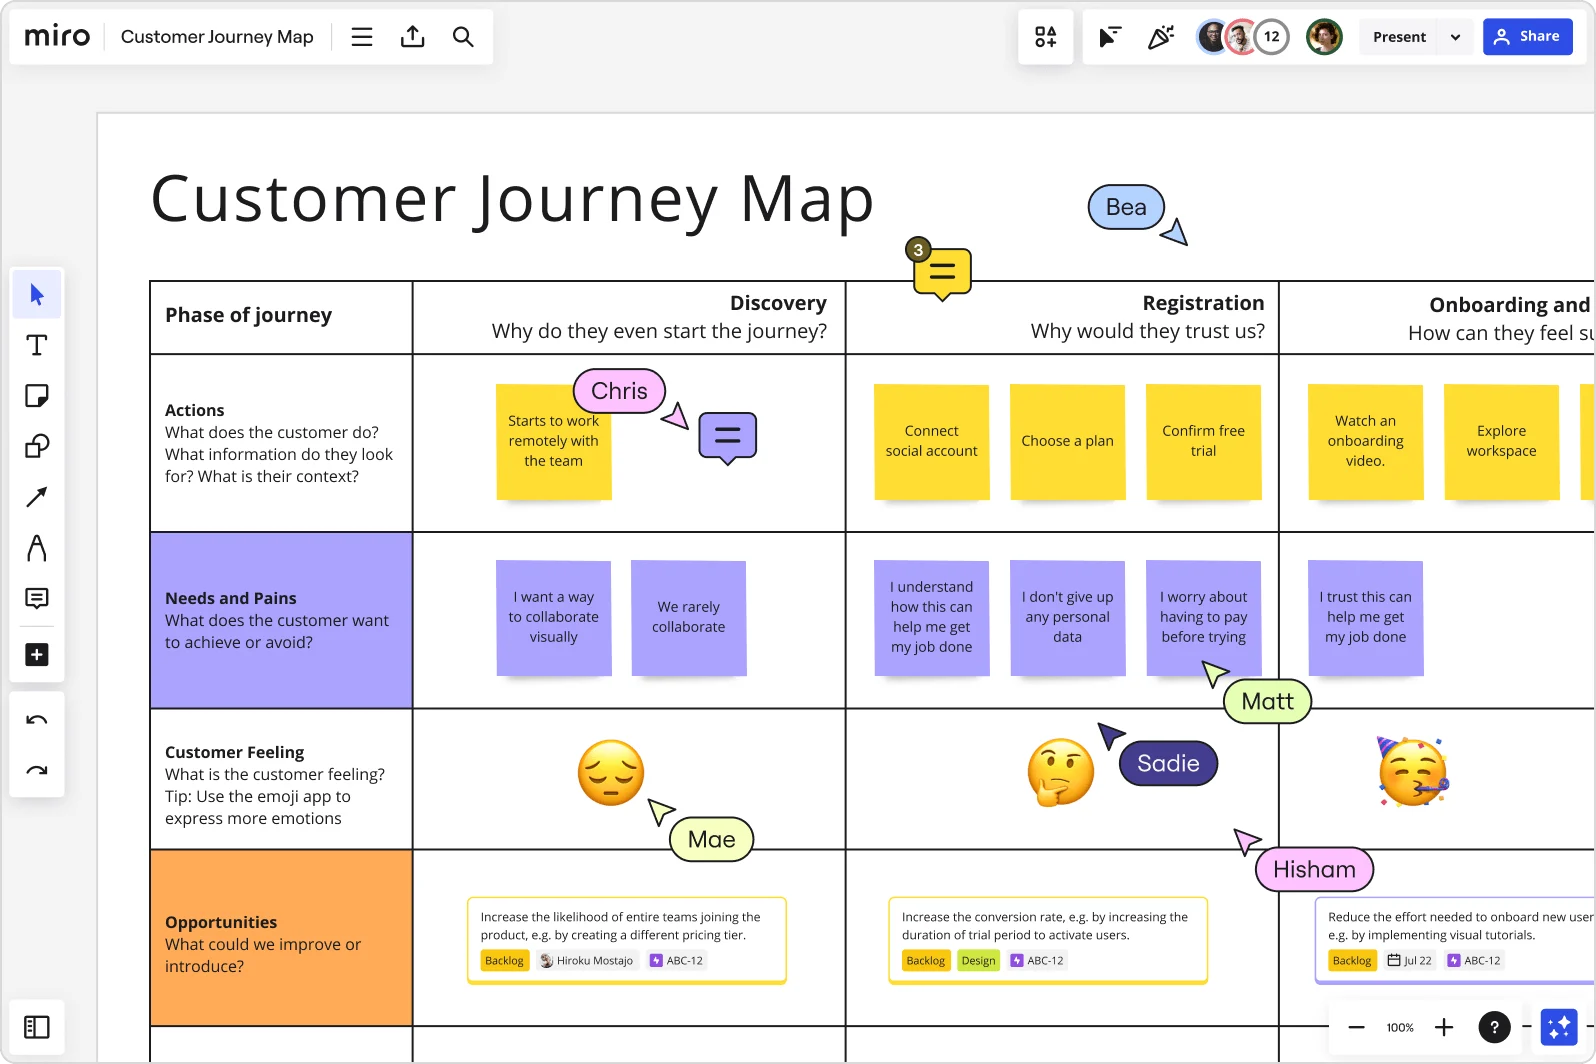 An image showing a customer journey map made in Miro